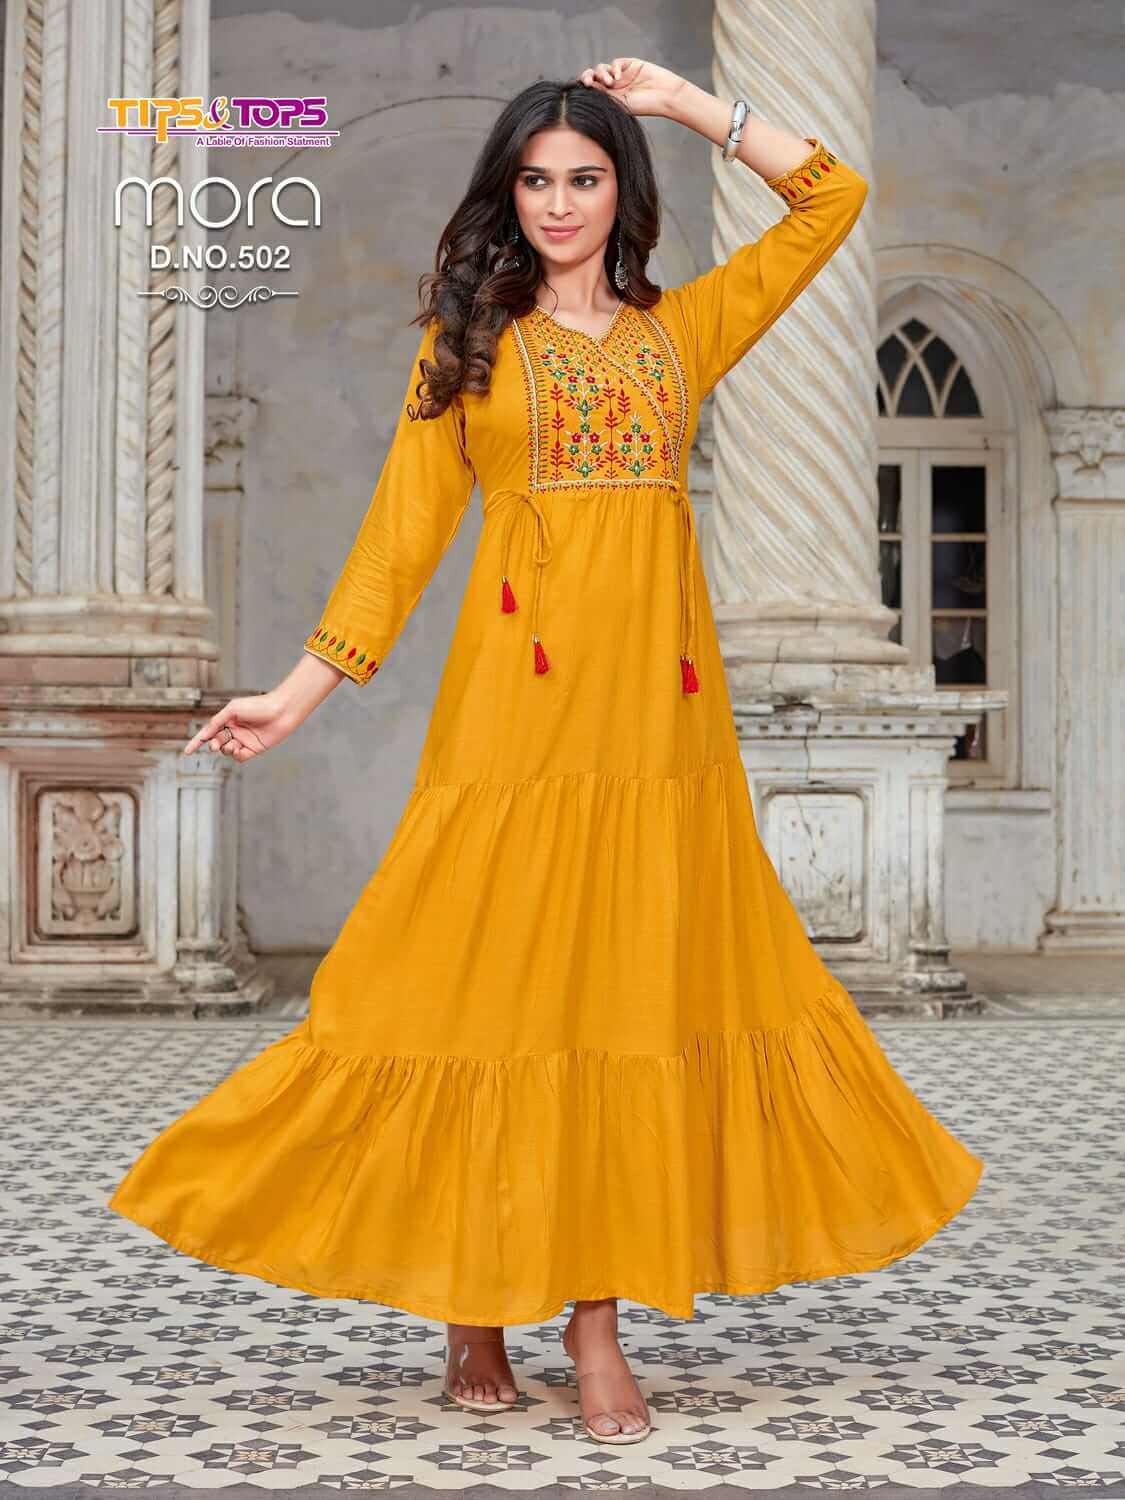 Tips and Tops Mora Vol 5 Gowns Catalog collection 3